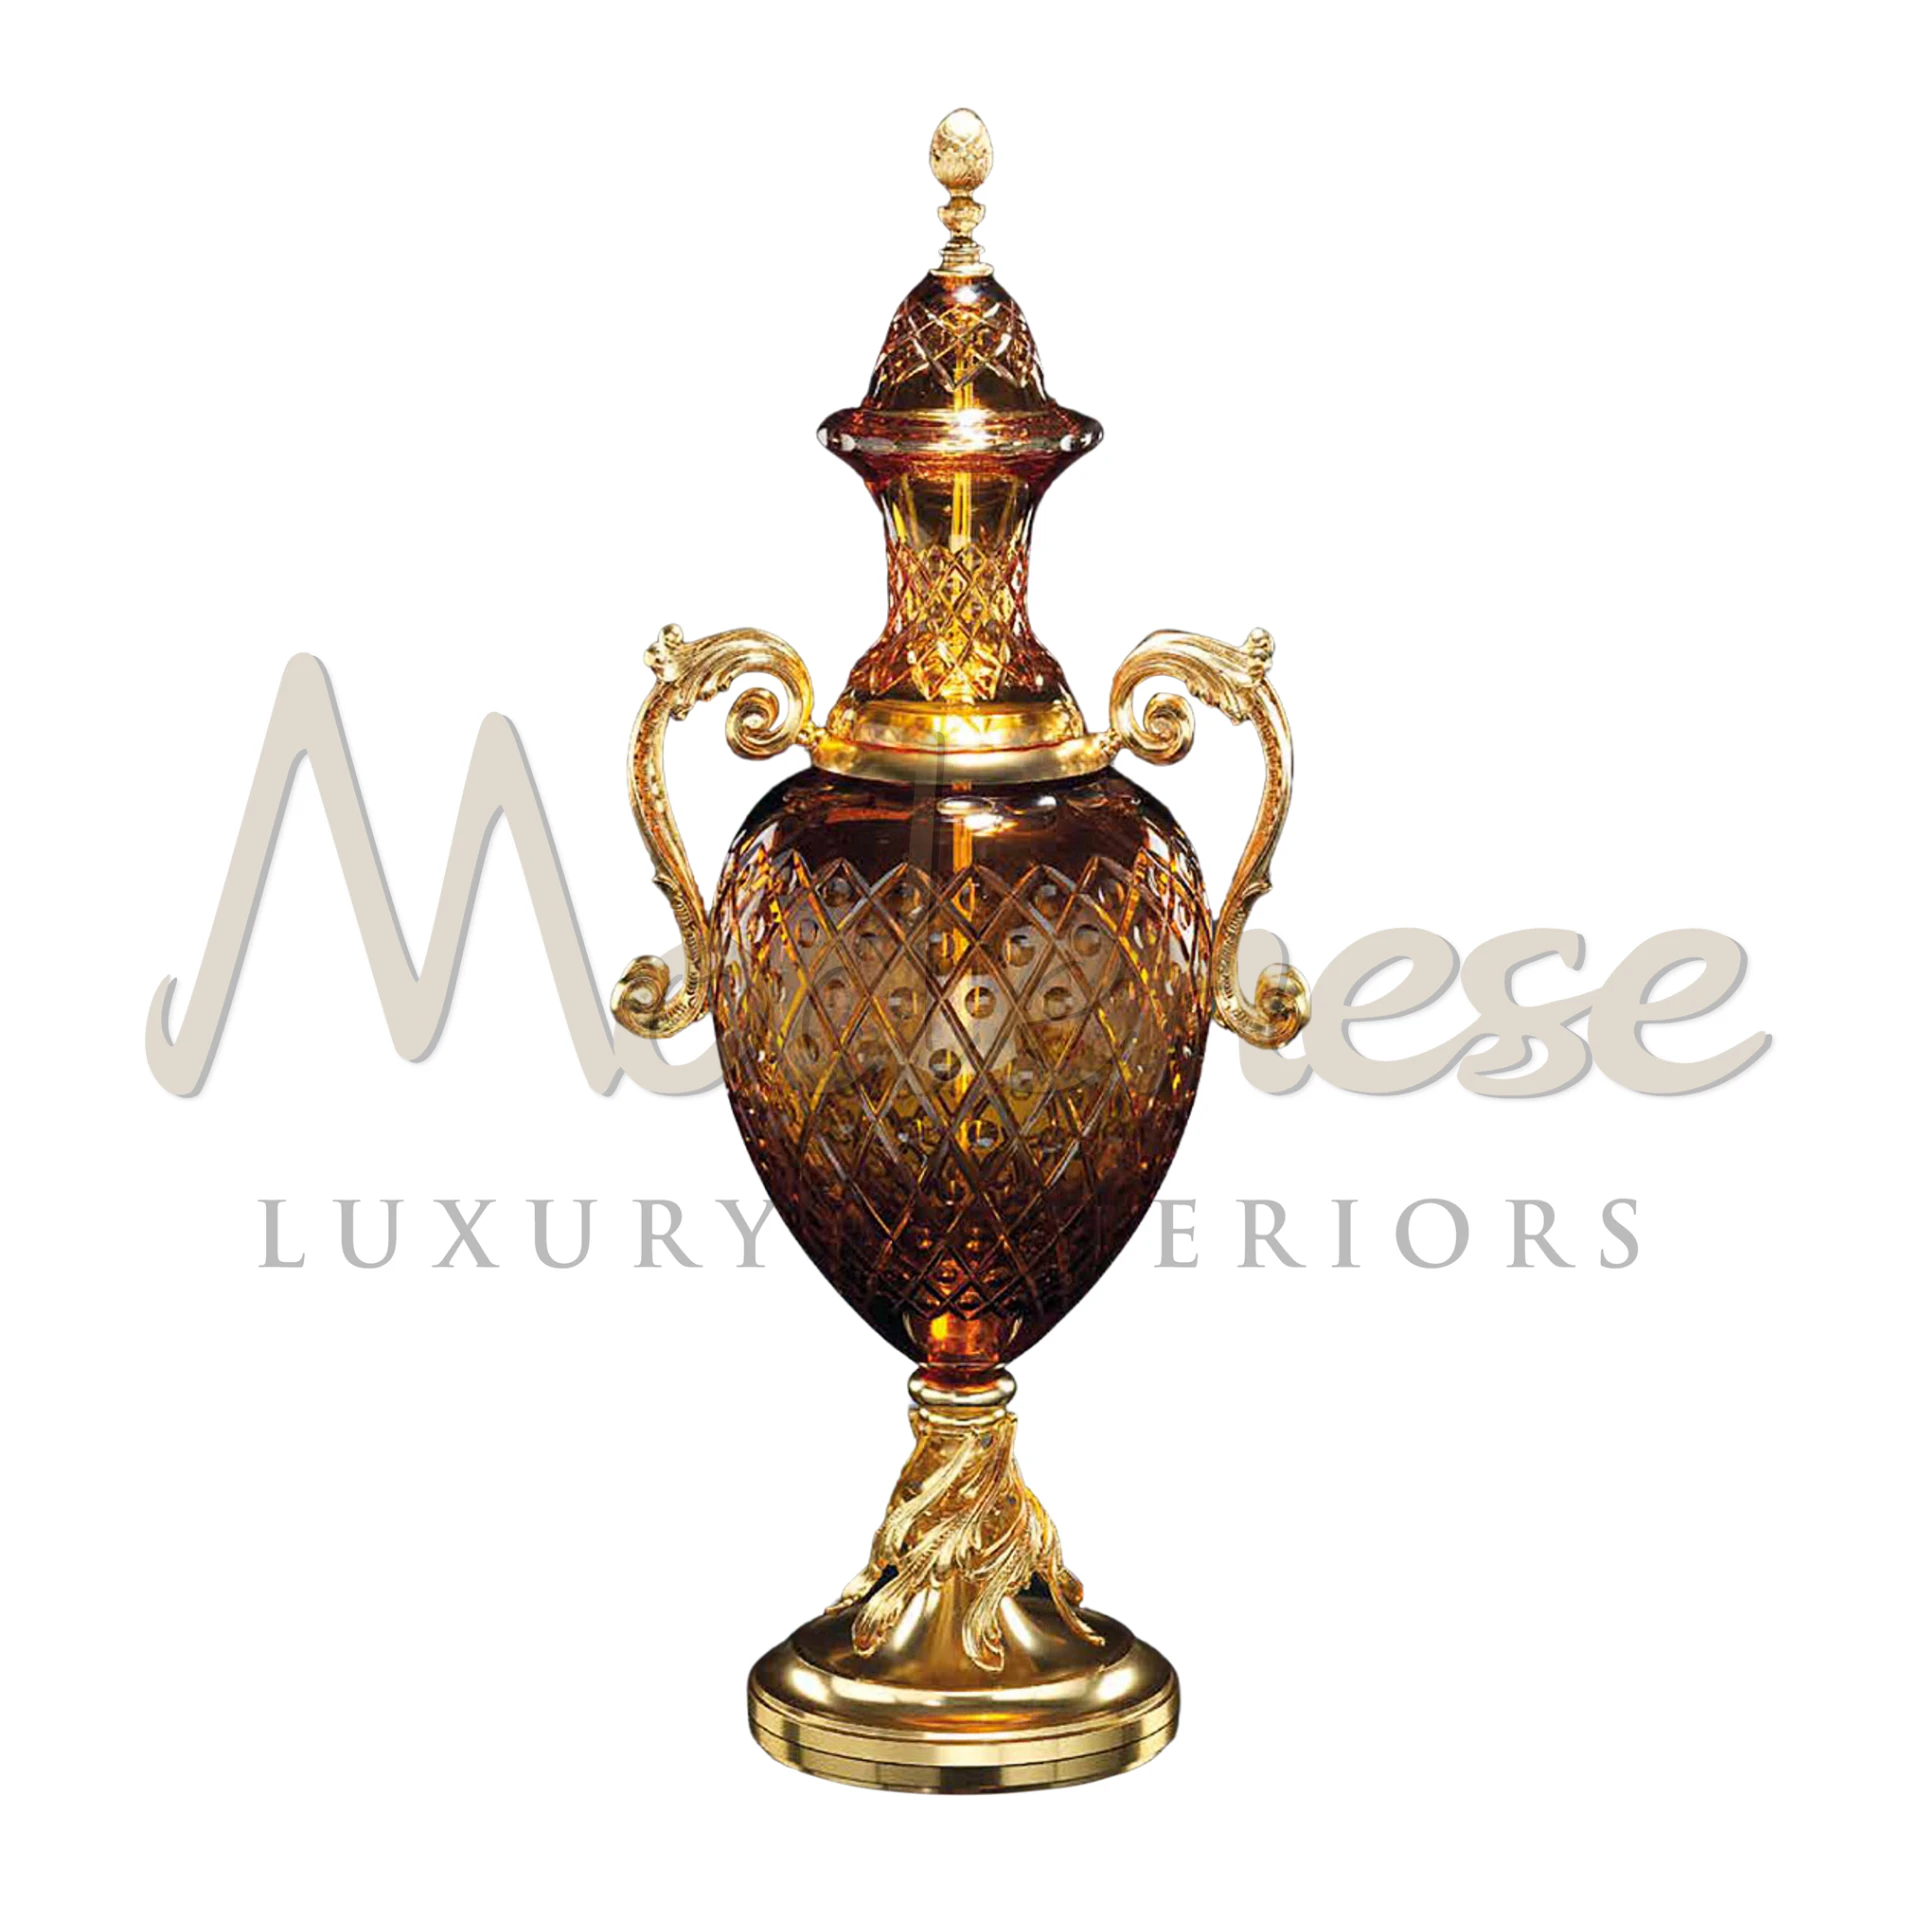 Crystal decorative vase with gold handles, showcasing elegance and luxury, with intricate etchings for a sophisticated interior.